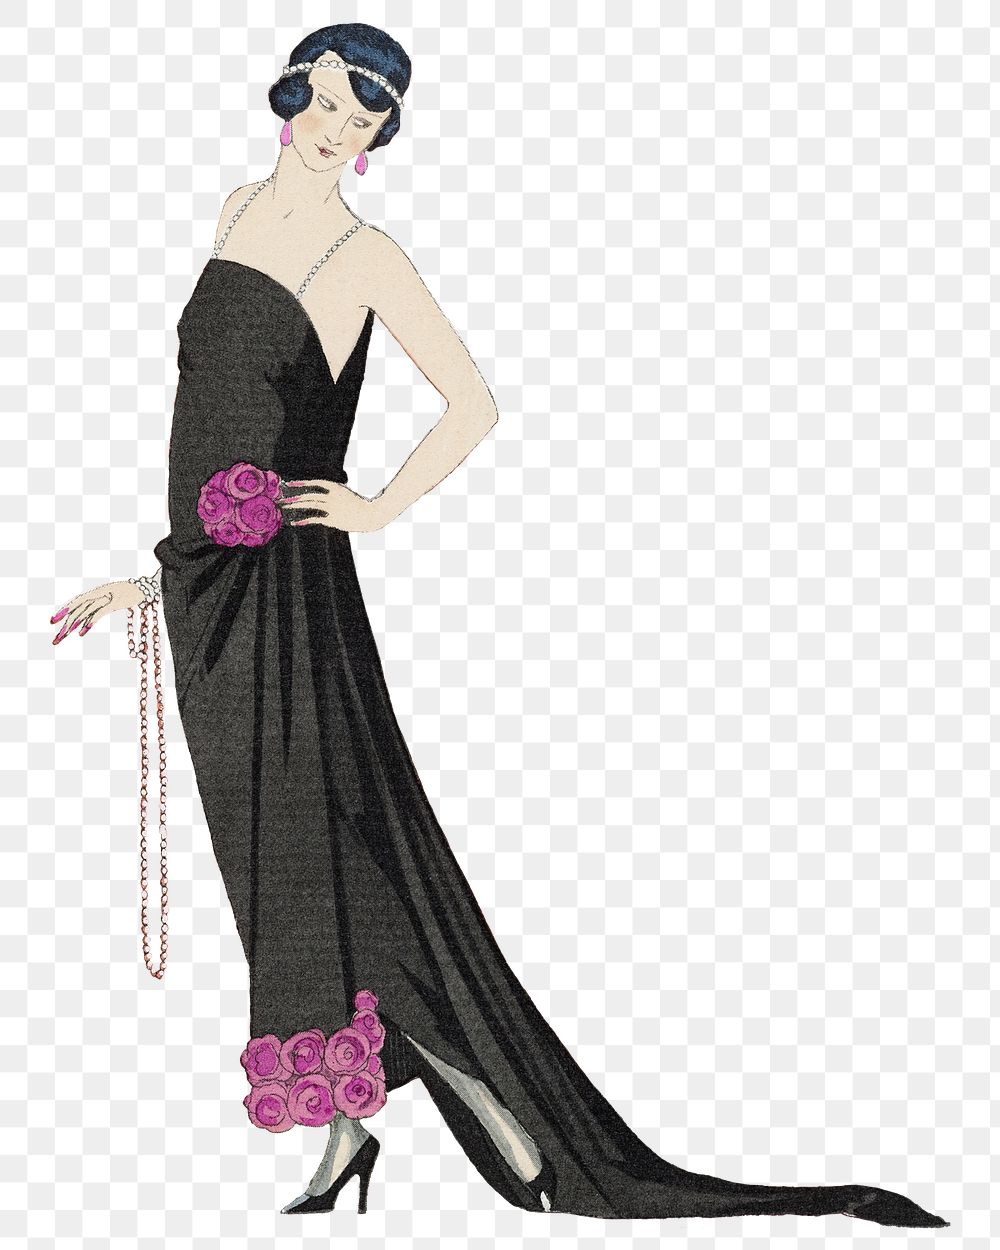 Woman in black dress png 19th century fashion, remix from artworks by George Barbier